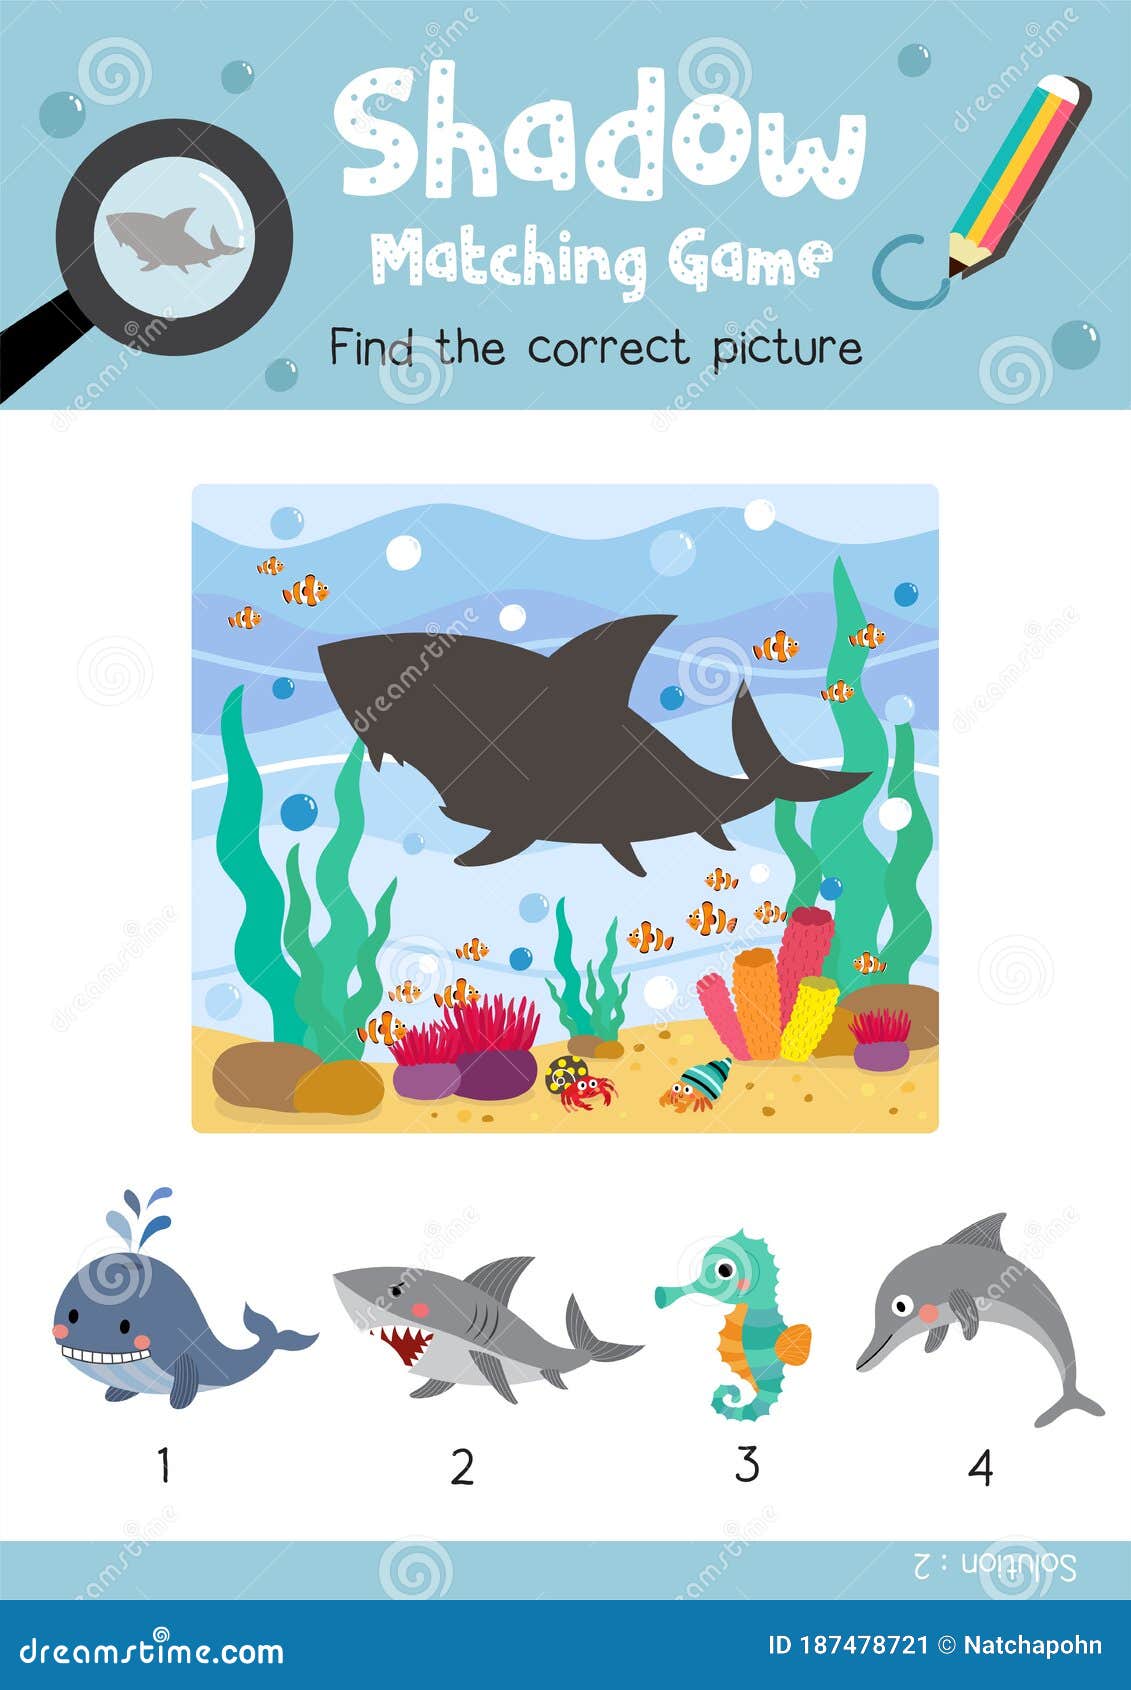 Shadow Matching Game Angry Shark Animal Cartoon Character Picture Vector  Illustration Stock Vector - Illustration of correct, silhouette: 187478721